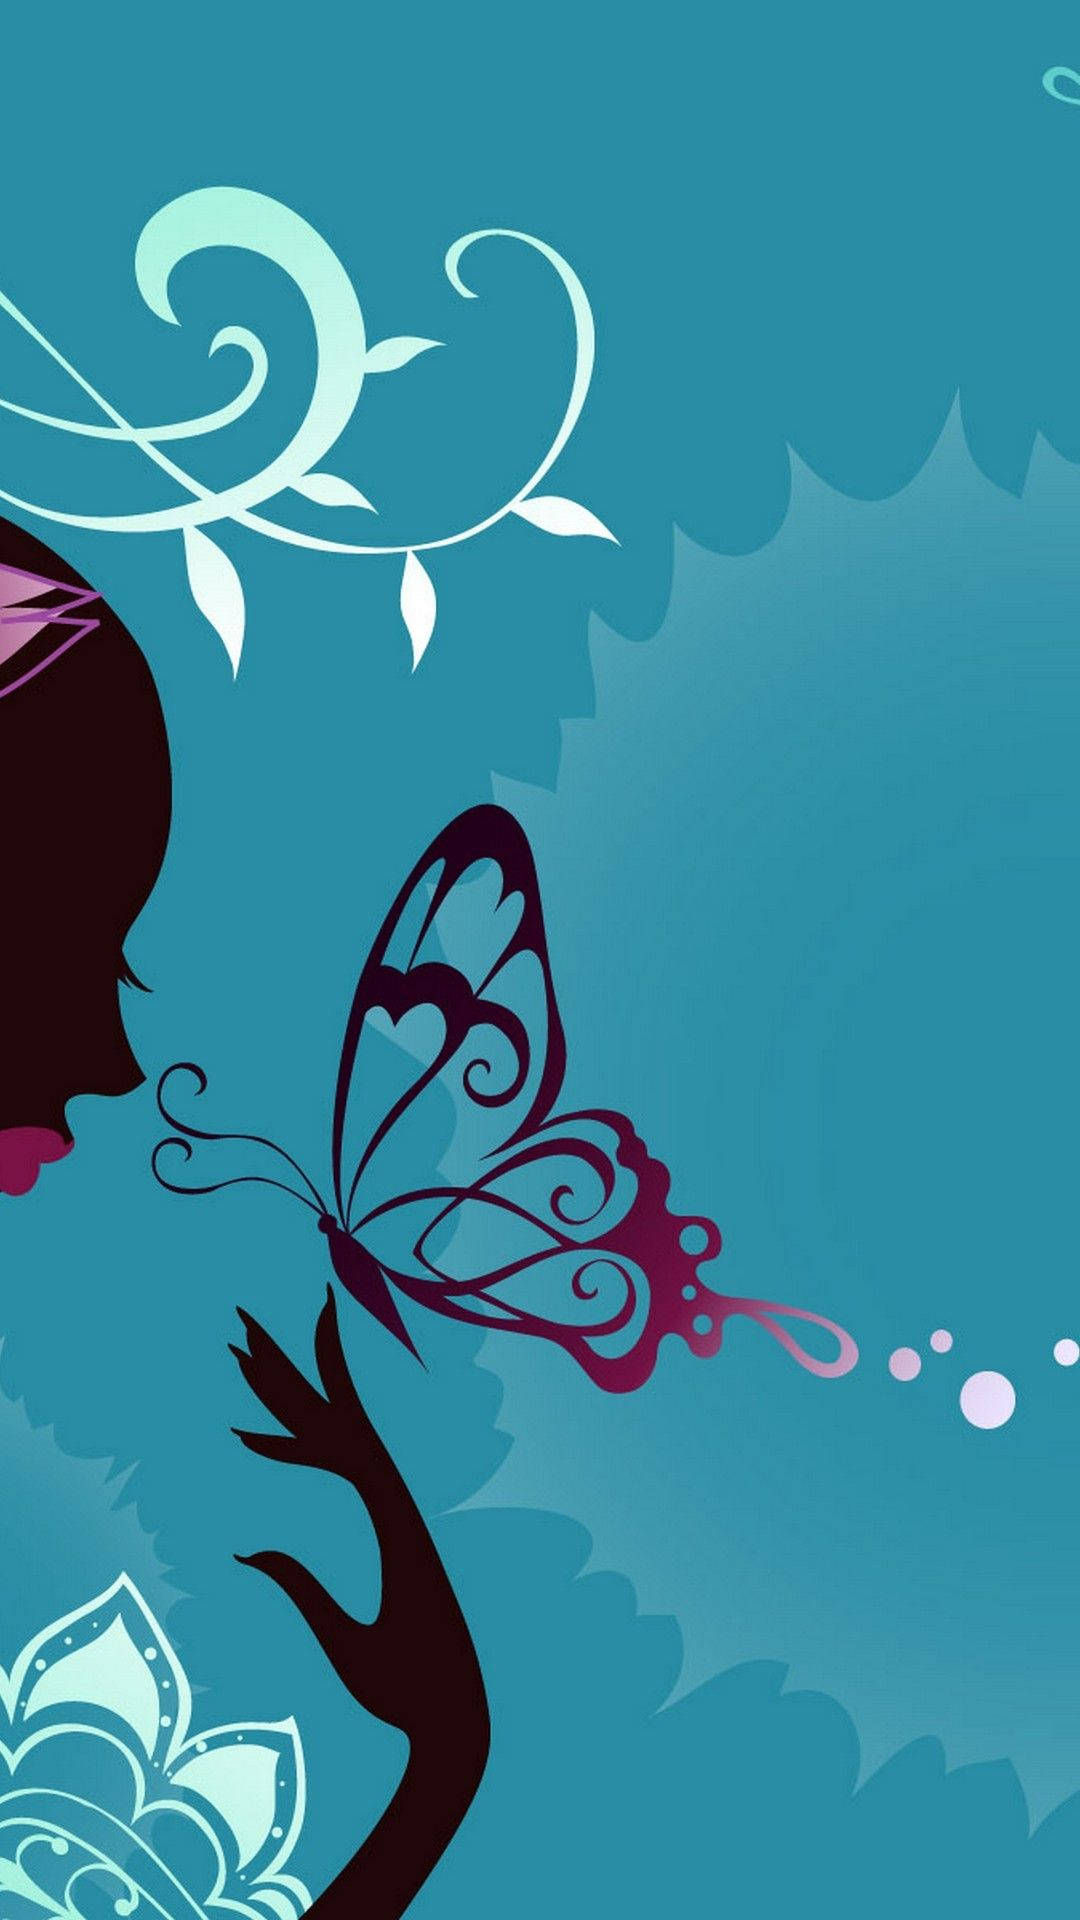 Marvelous Illustration Of Butterfly Iphone Theme